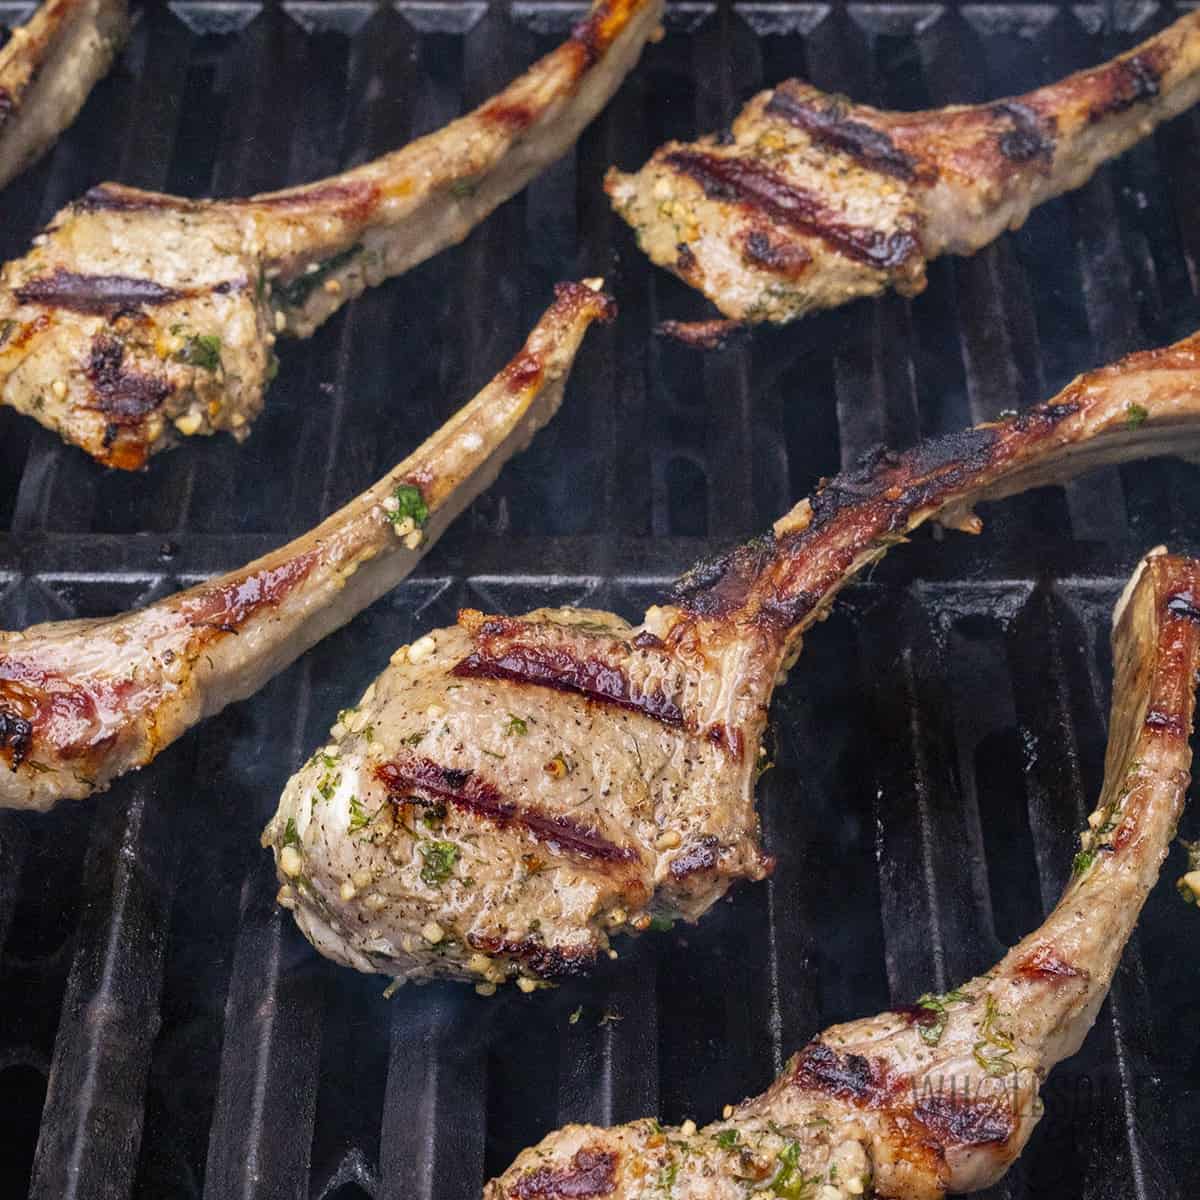 Lamb chops grilling on grill grates.